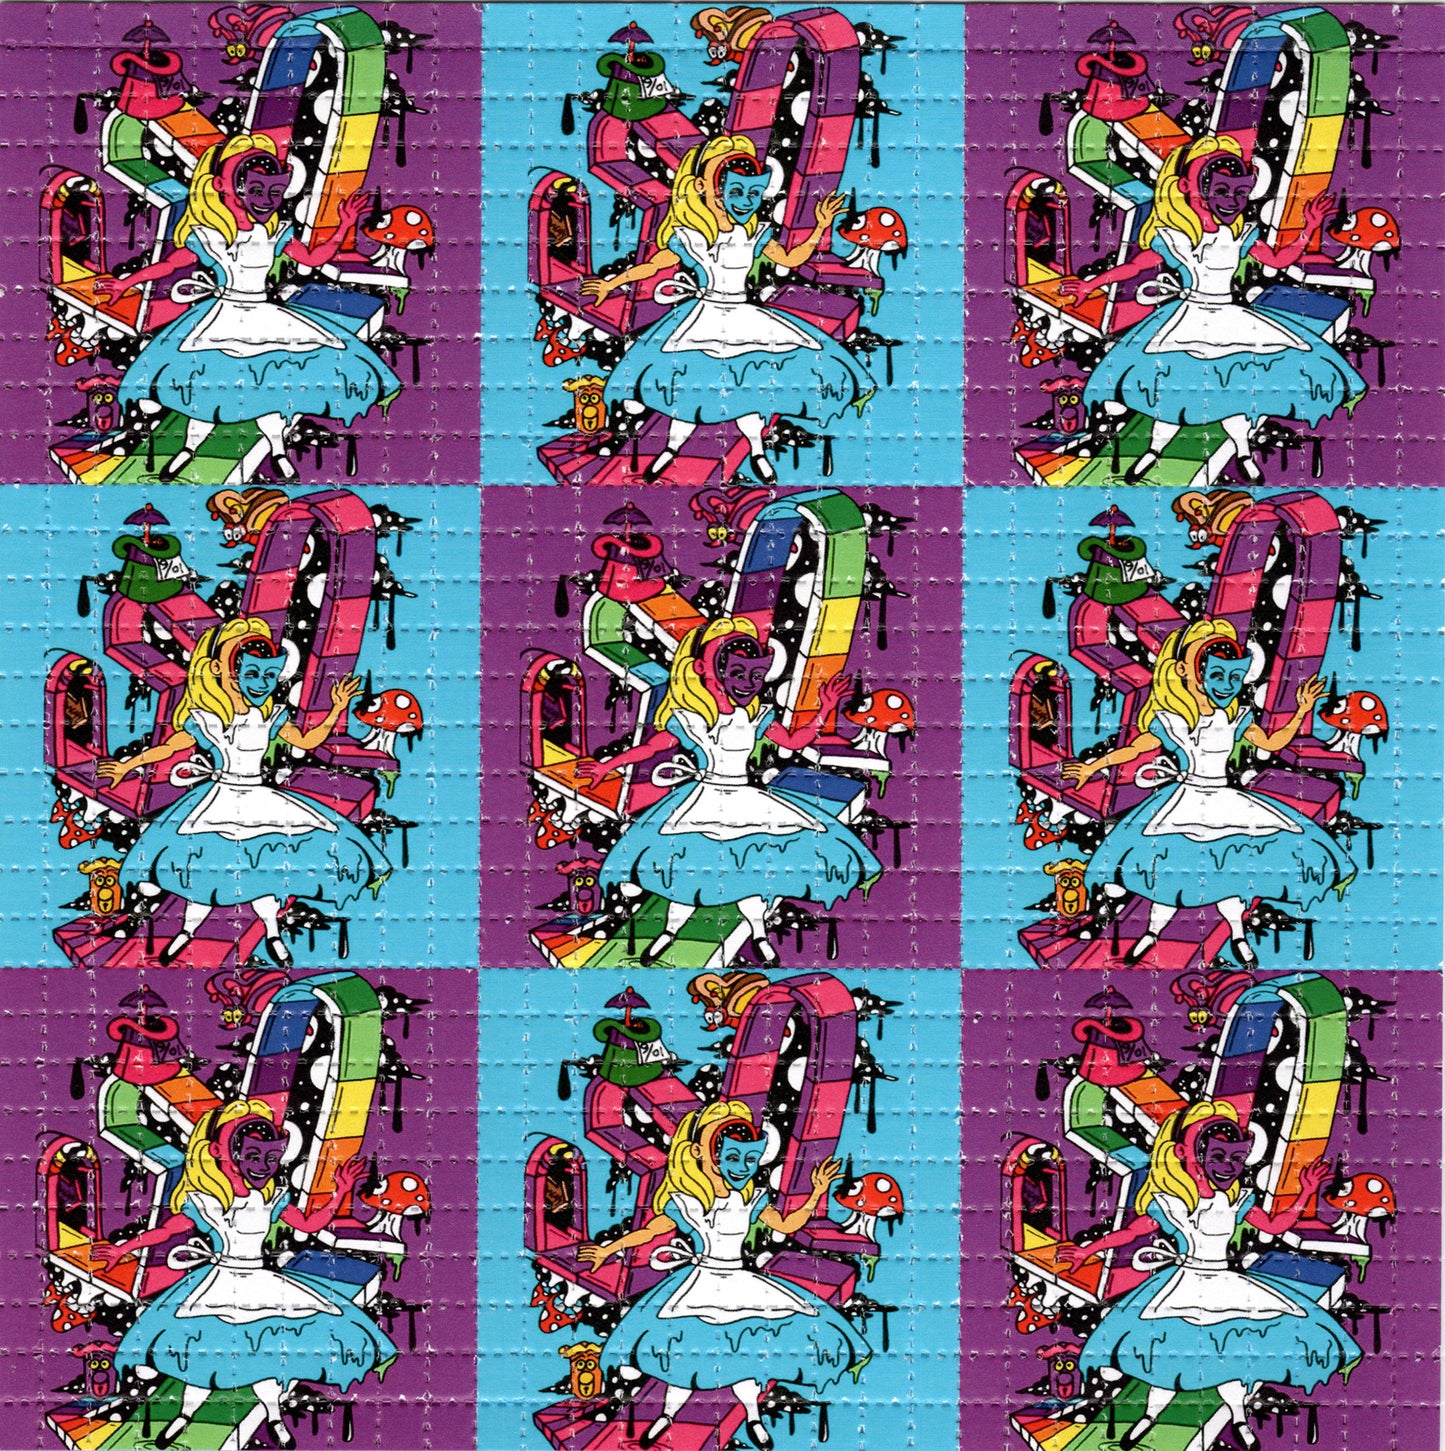 Alice X9 by Crisis Chris Signed Limited Edition LSD blotter art print